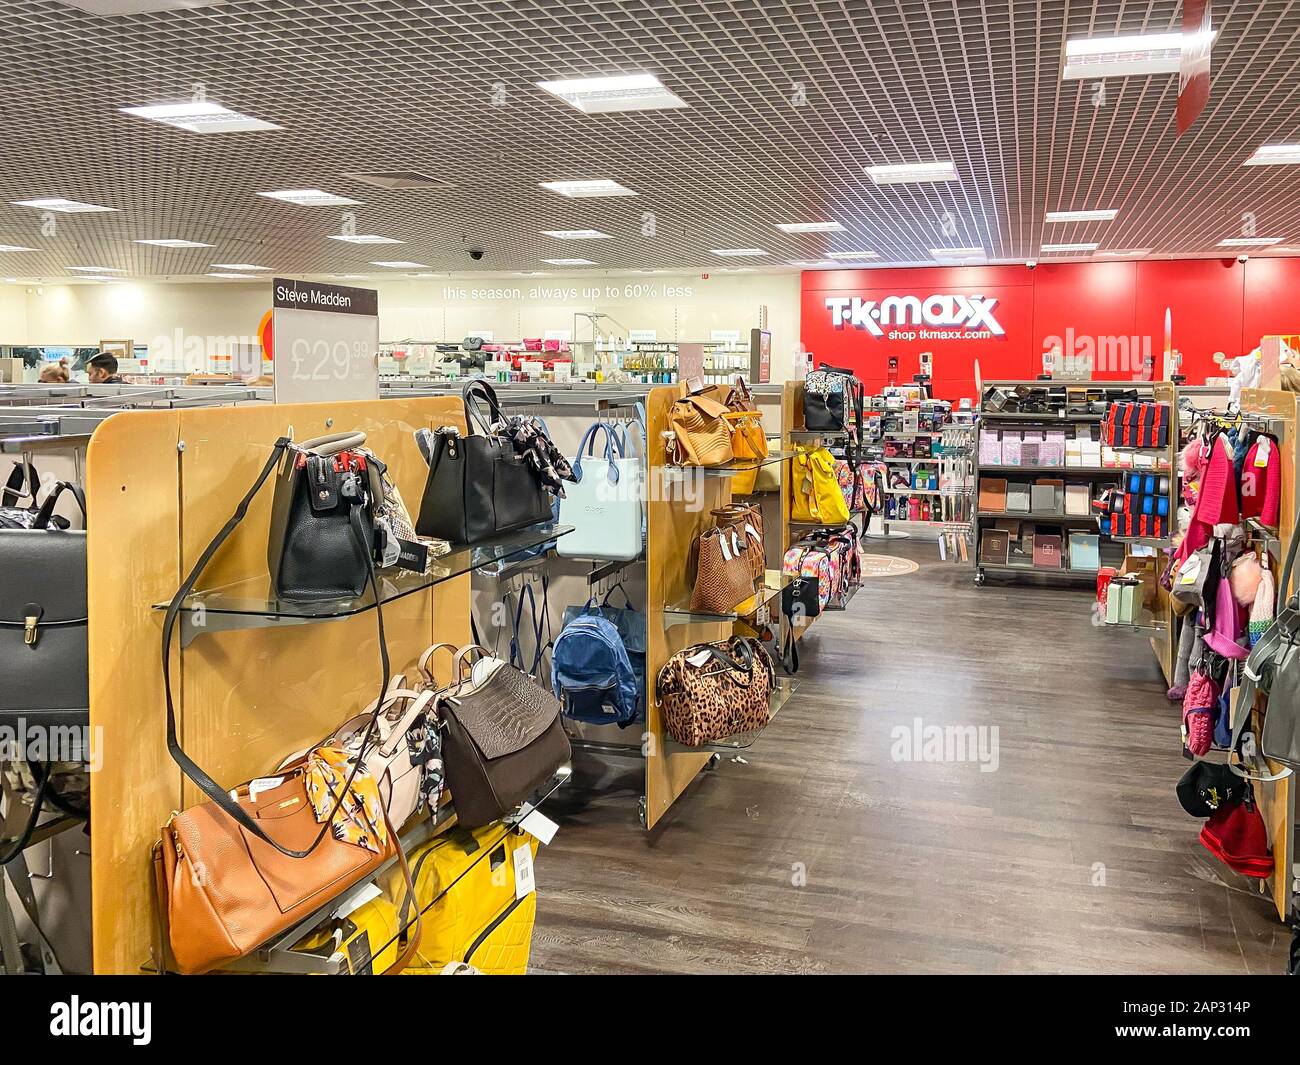 T k maxx hi-res stock photography and images - Alamy